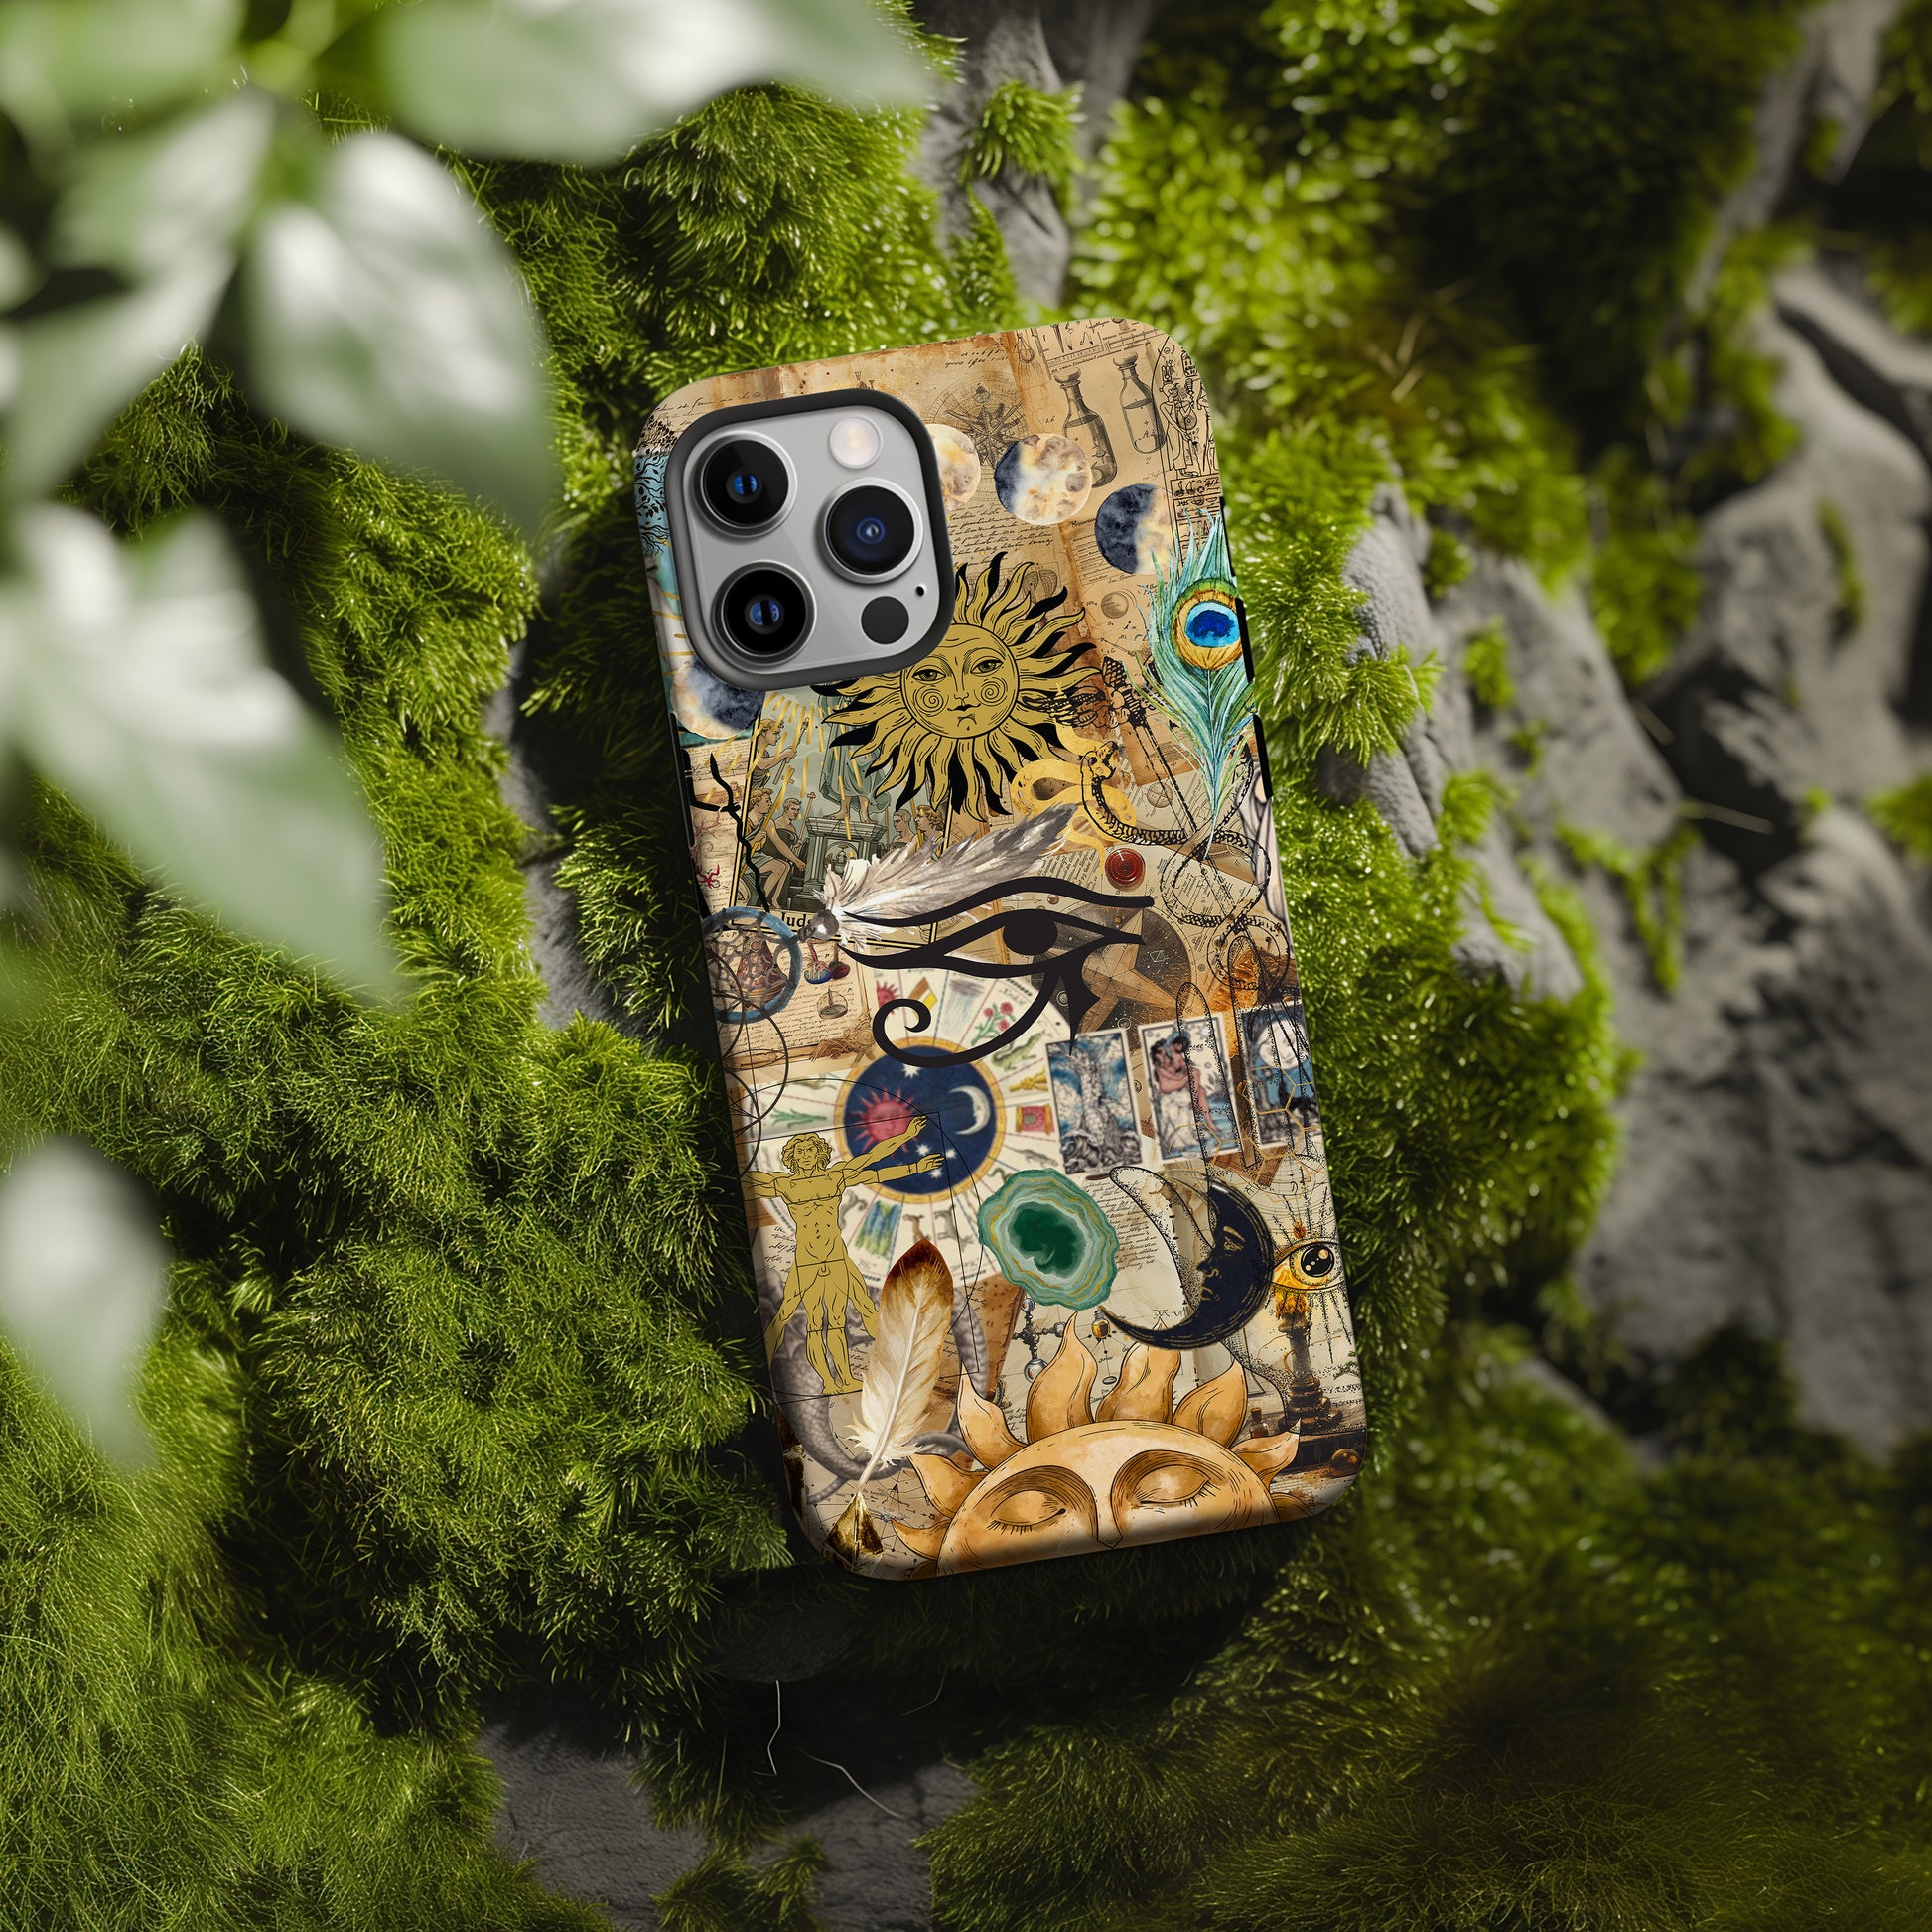 moss rock with mystical collage phone case by Artscape Market filled with celestial astrology tarot and alchemical images in watercolor scrapbook collage style